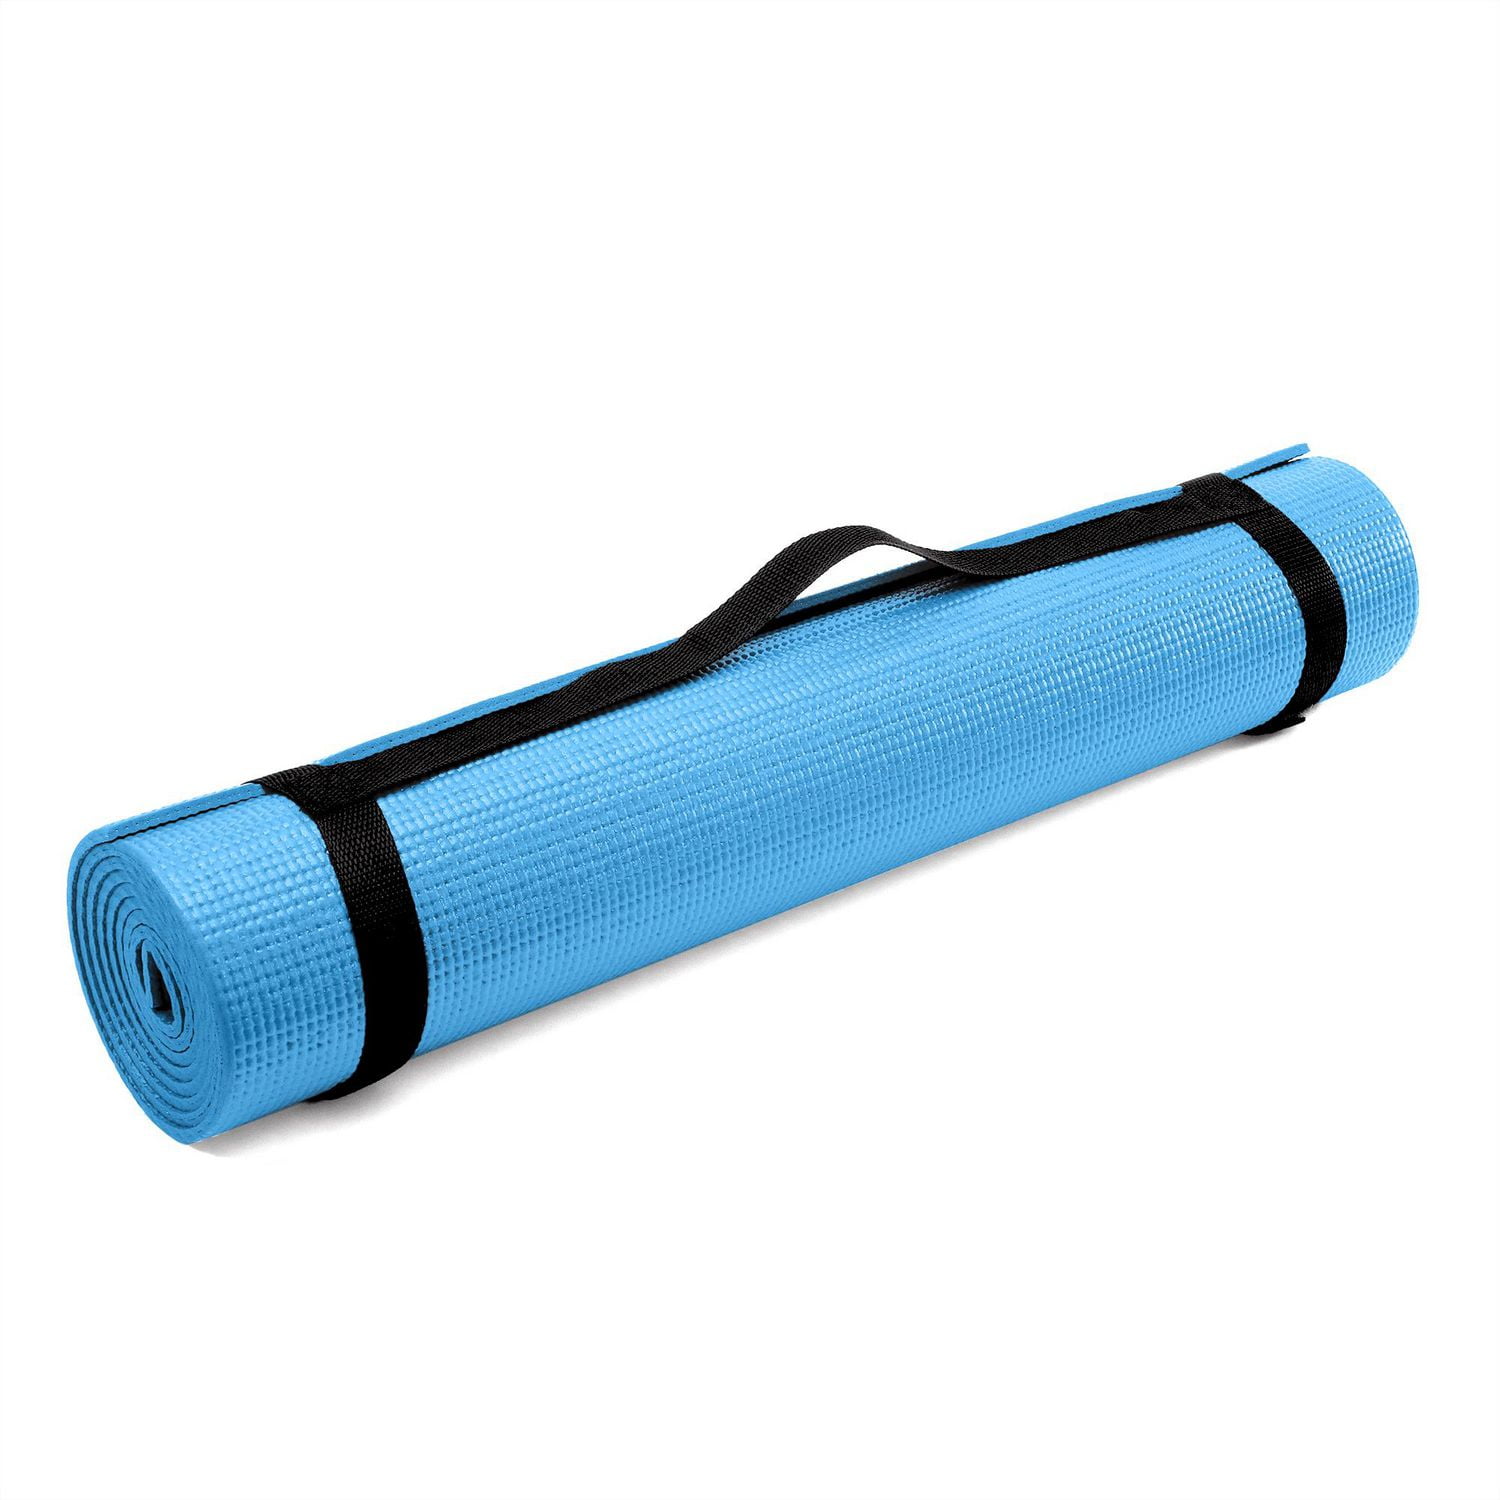 5mm Studio Grade Yoga Mat with Carry Strap